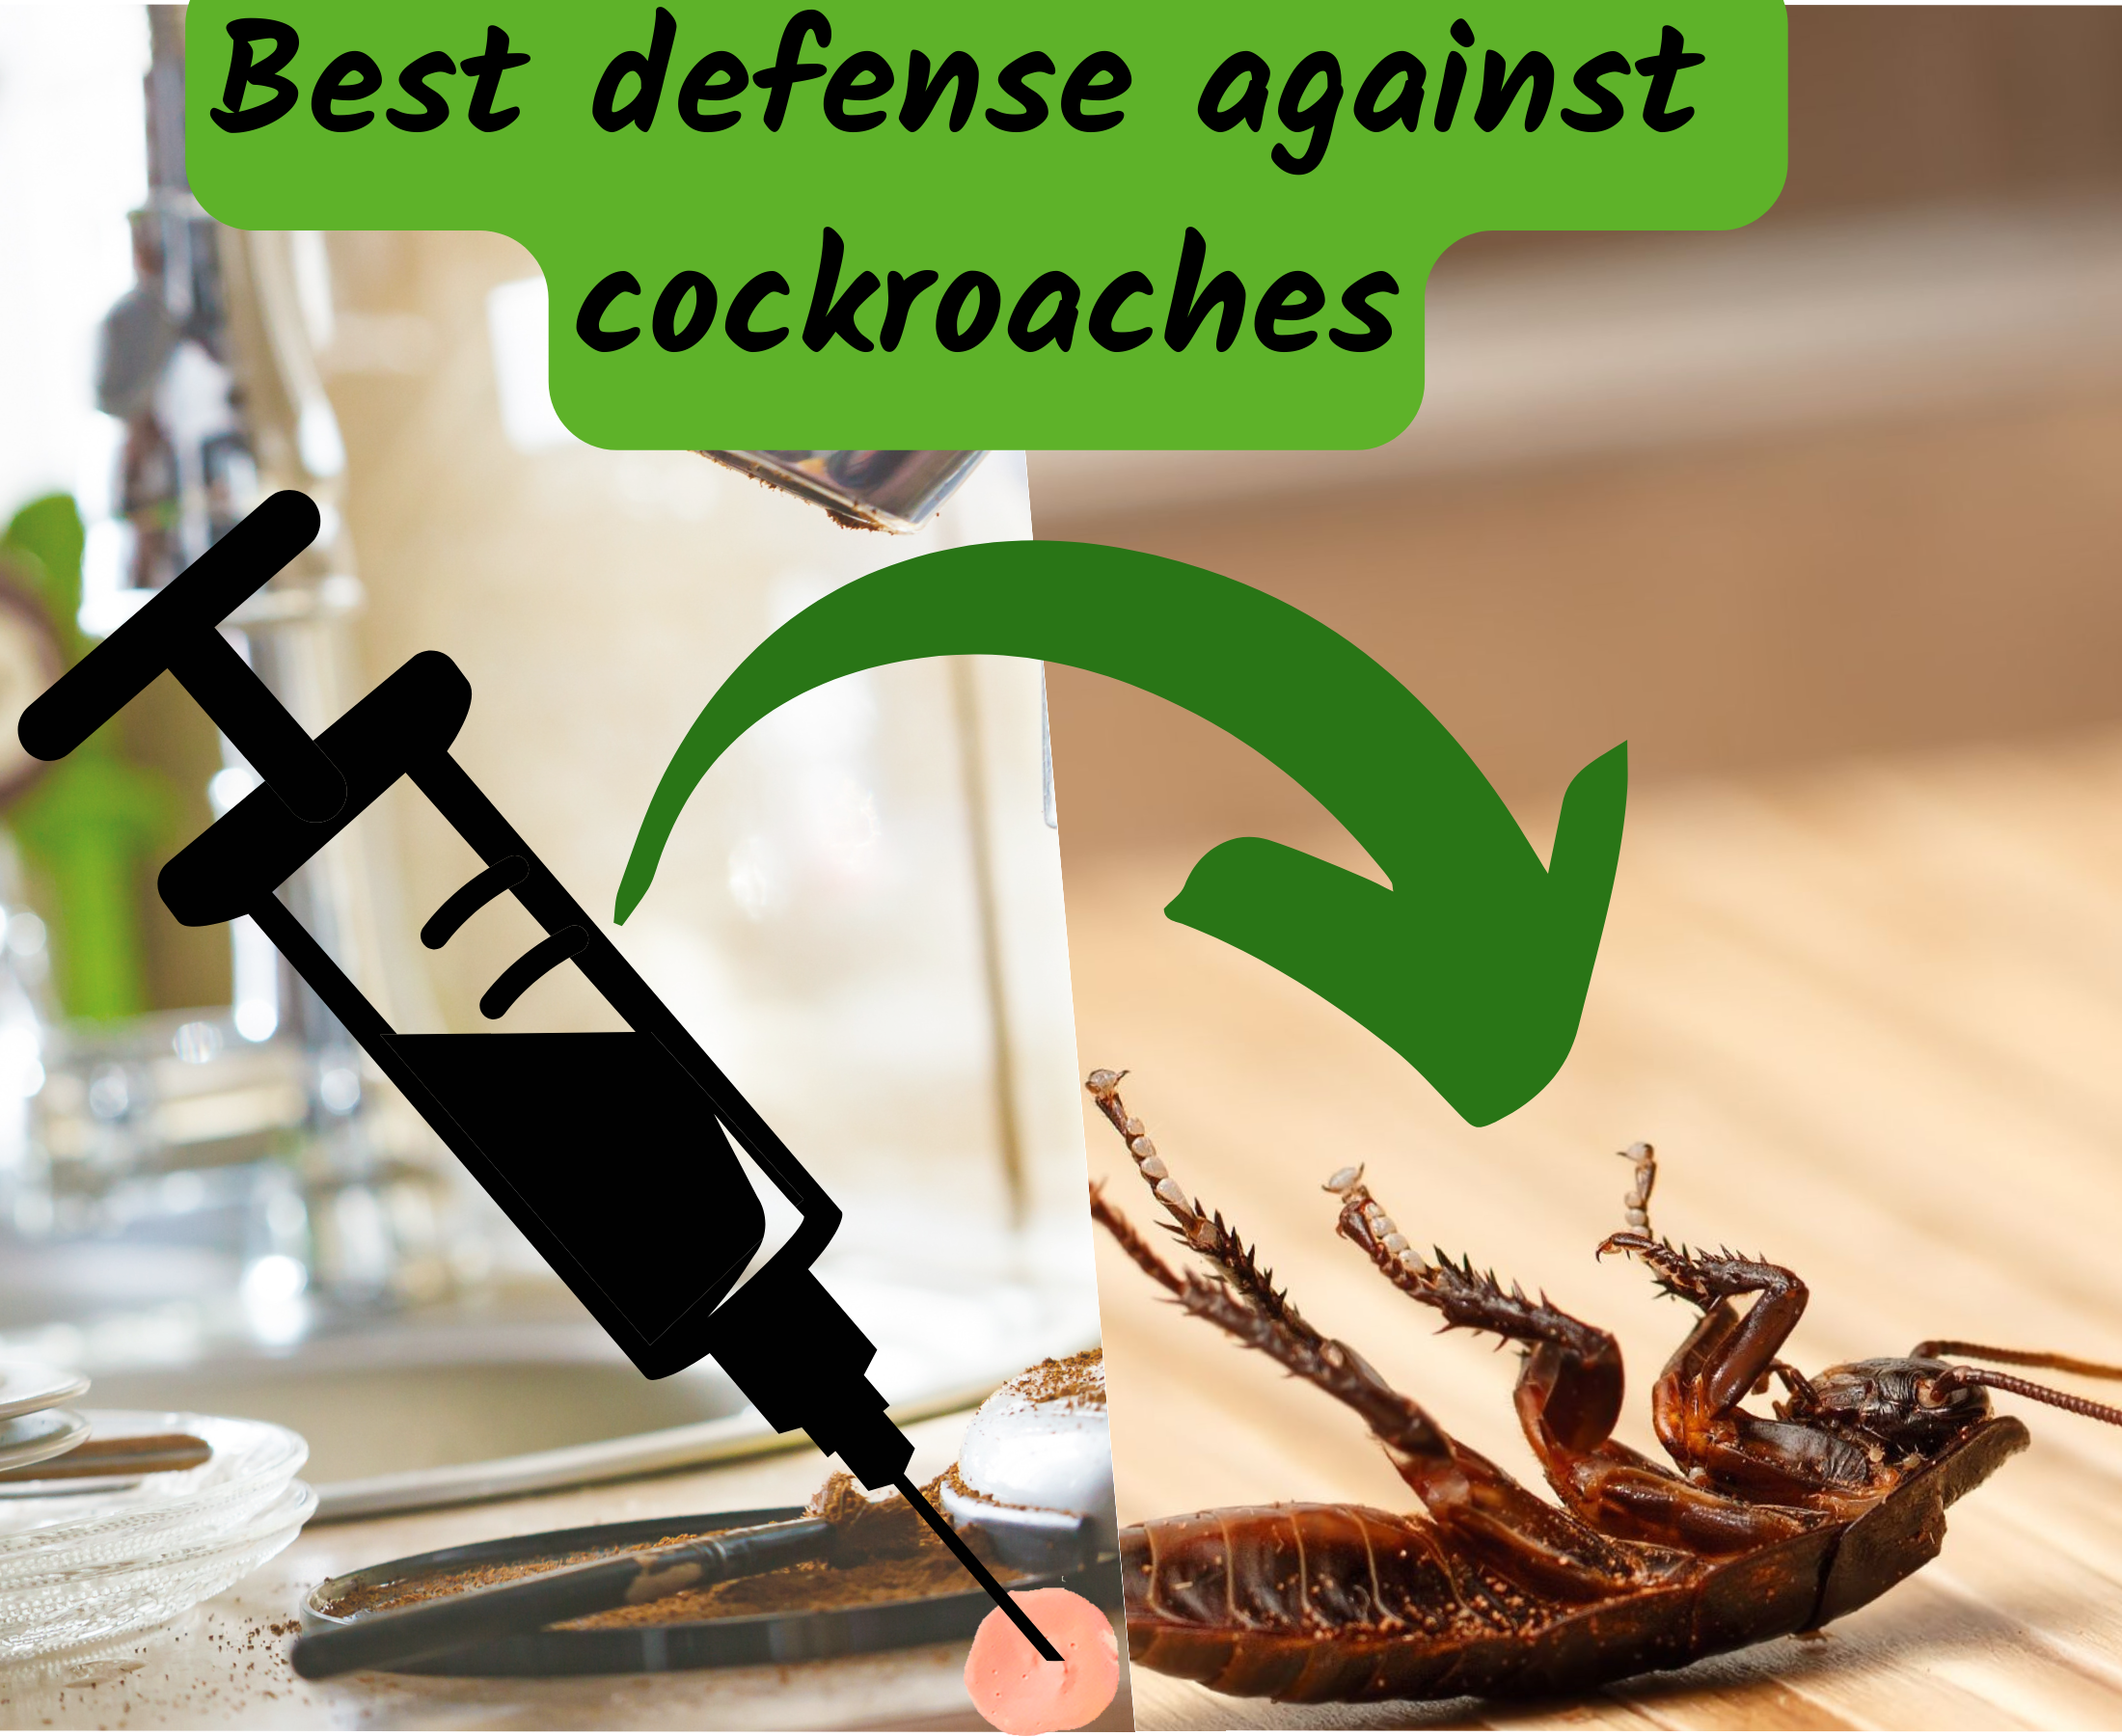 What is the best home defense for roaches?